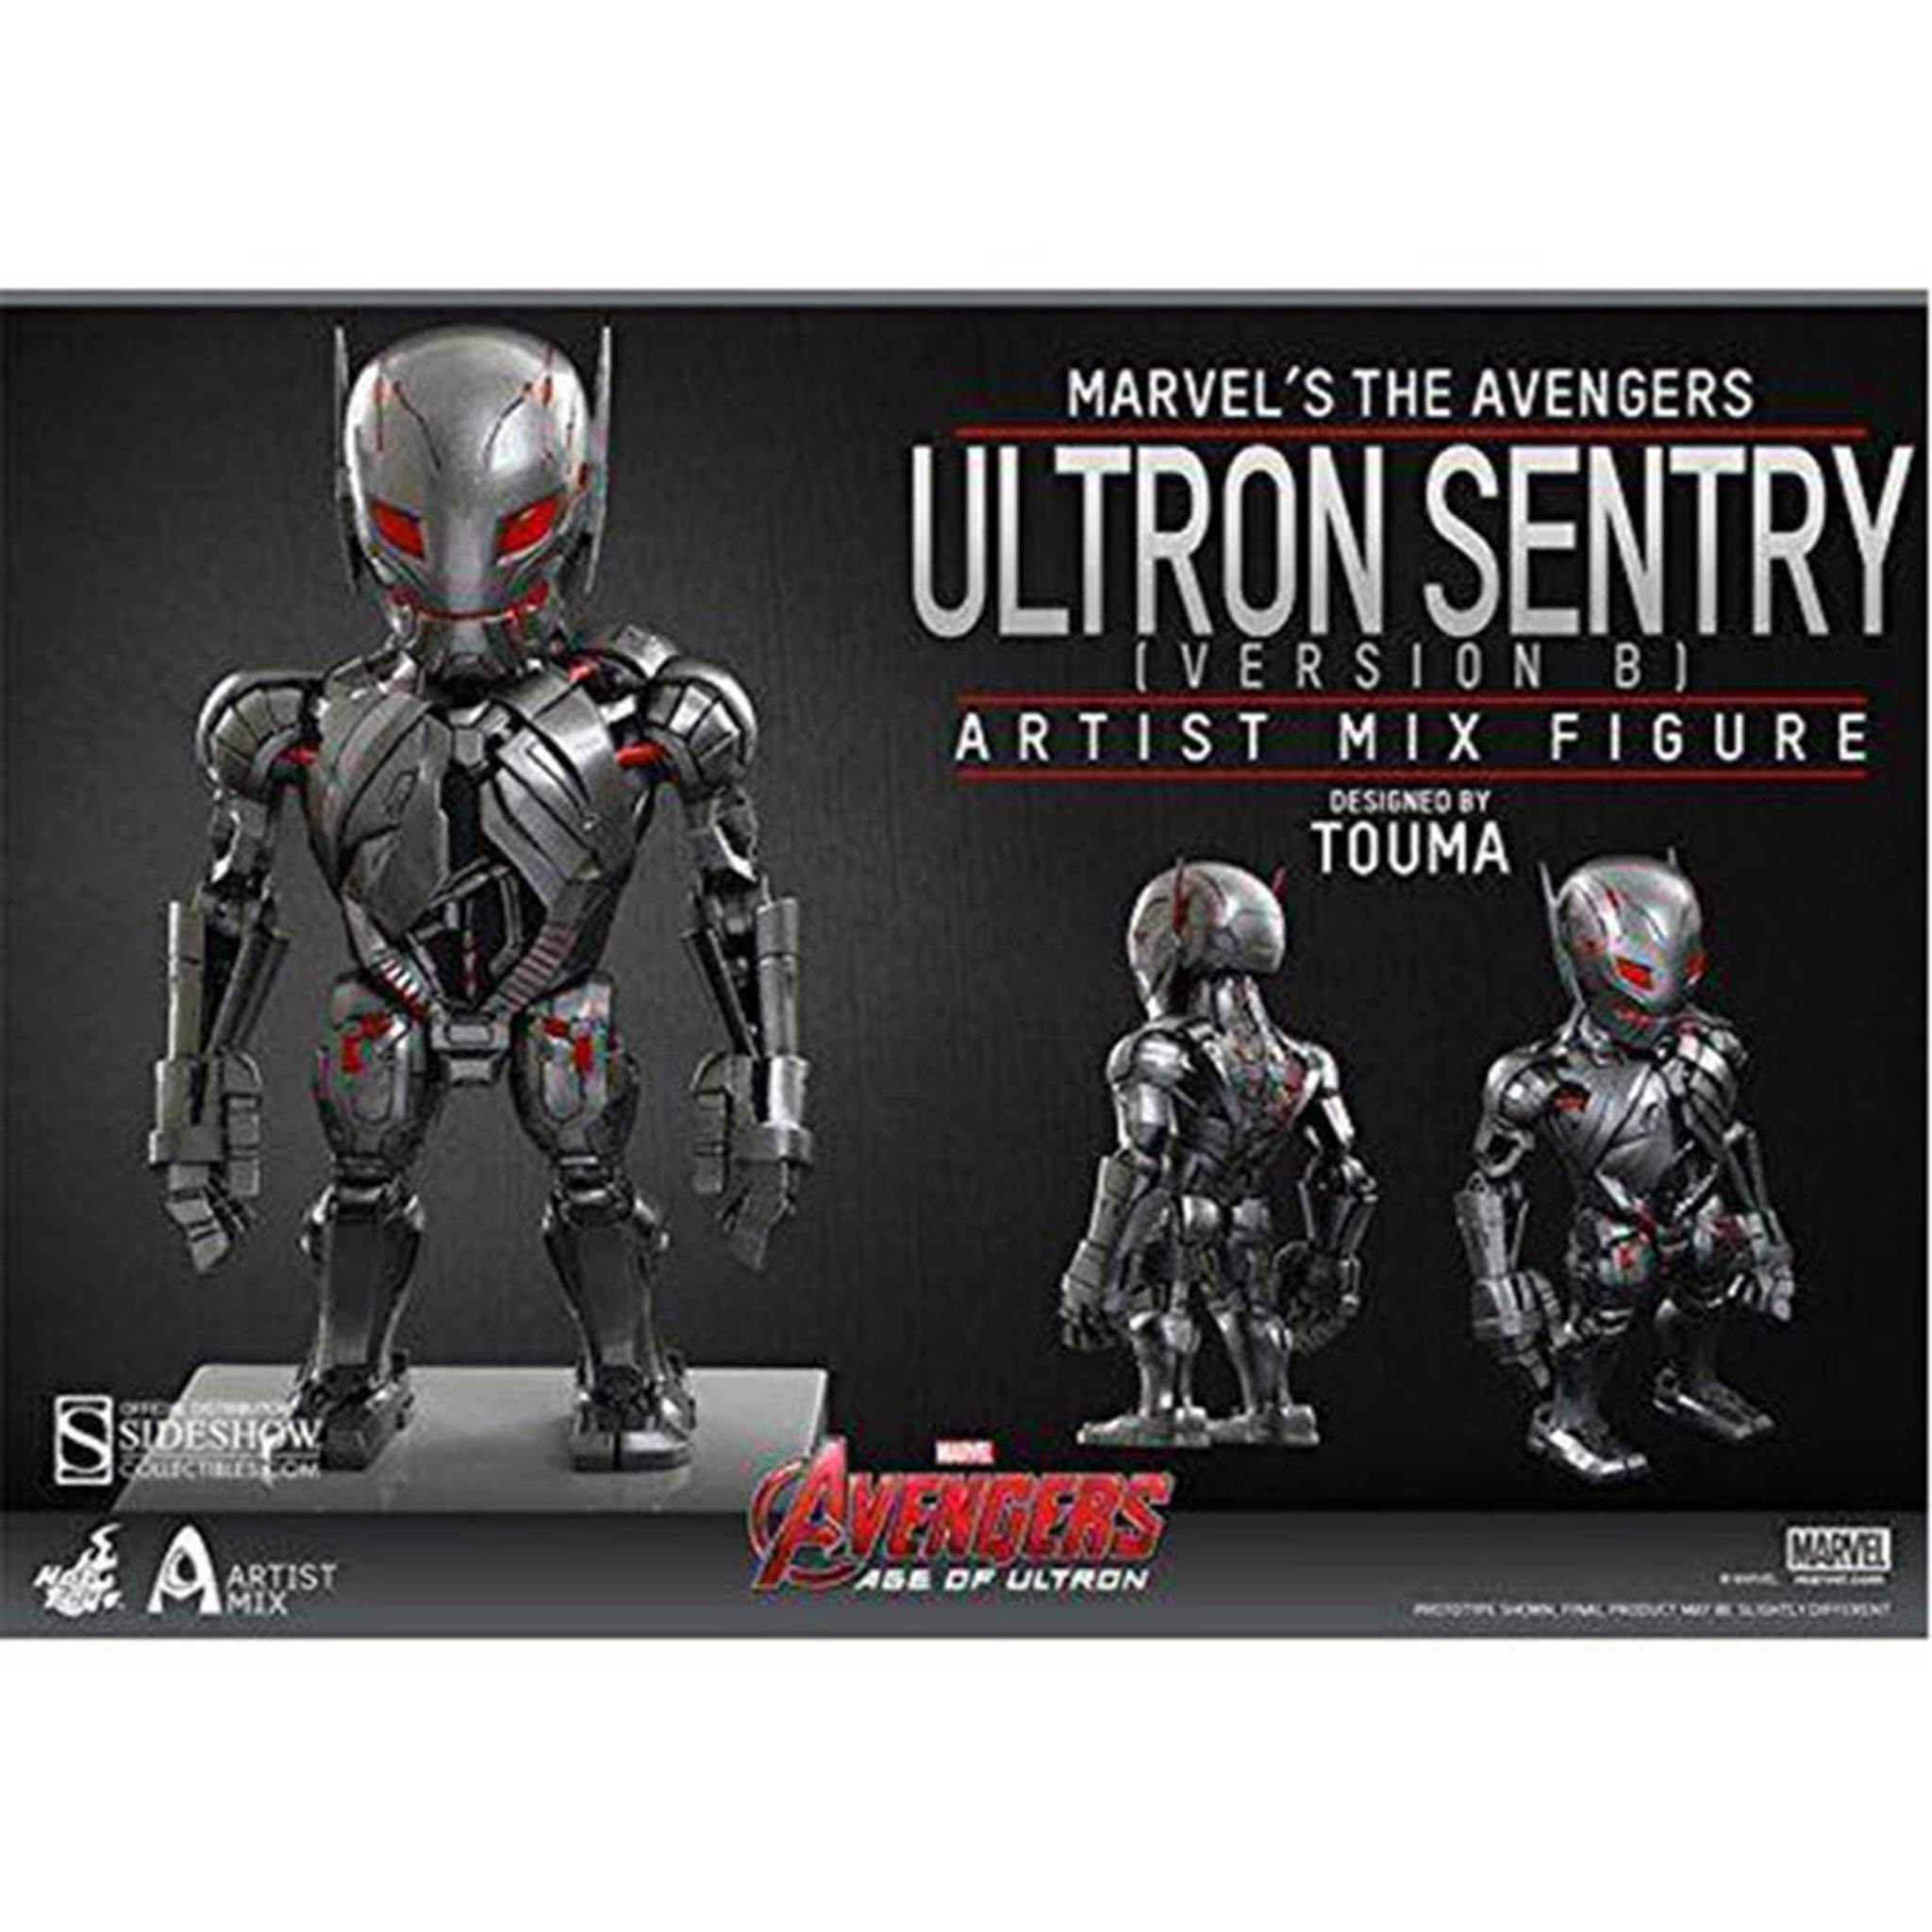 Hot Toys Avengers Age of Ultron Ultron Series 1 Sentry Version B Artist Mix Collectible Figure - NEXTLEVELUK